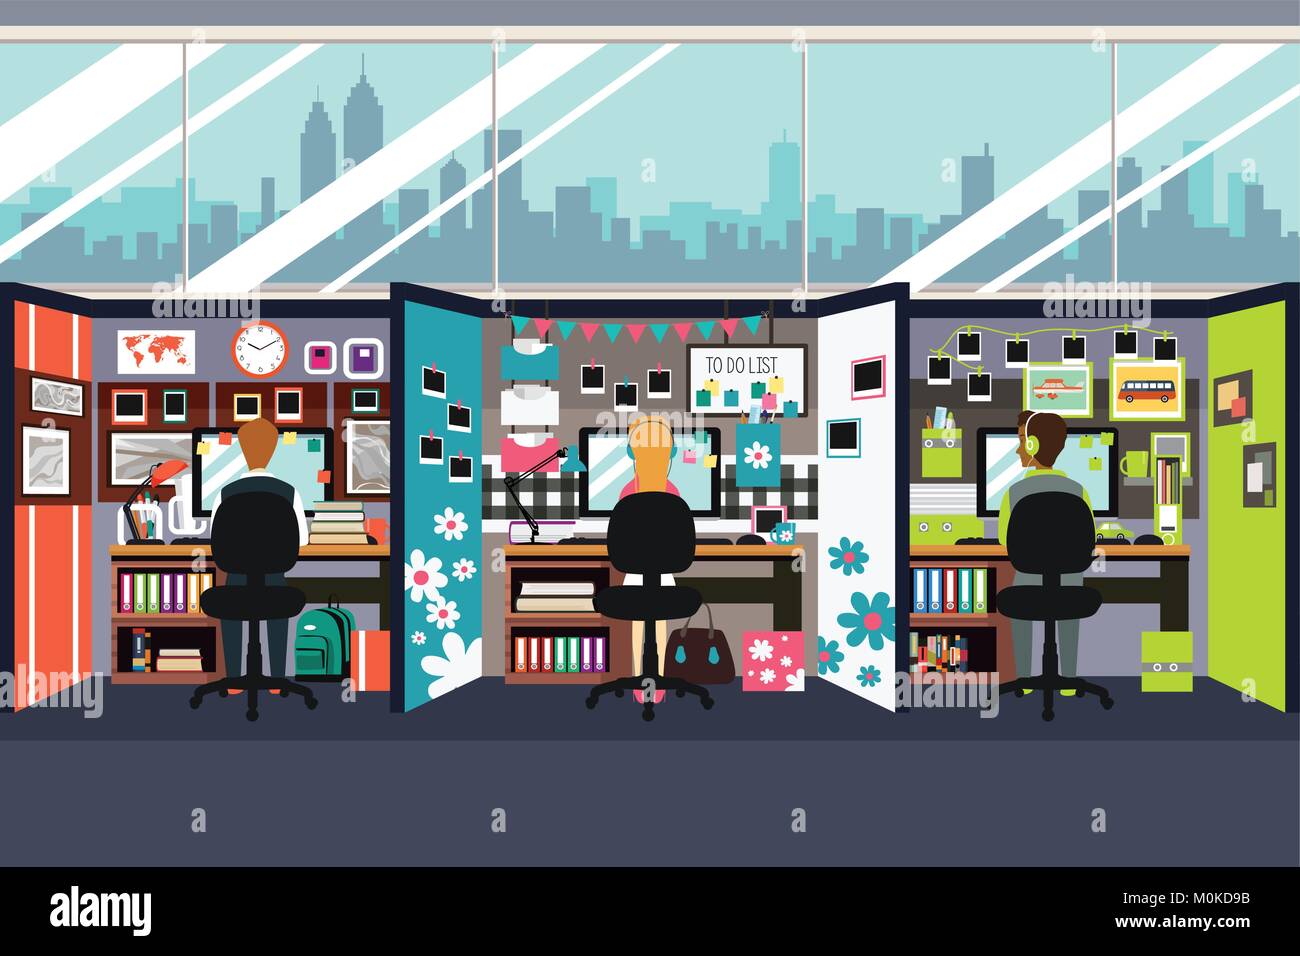 A vector illustration of Business People Working in Office Cubicles Stock Vector